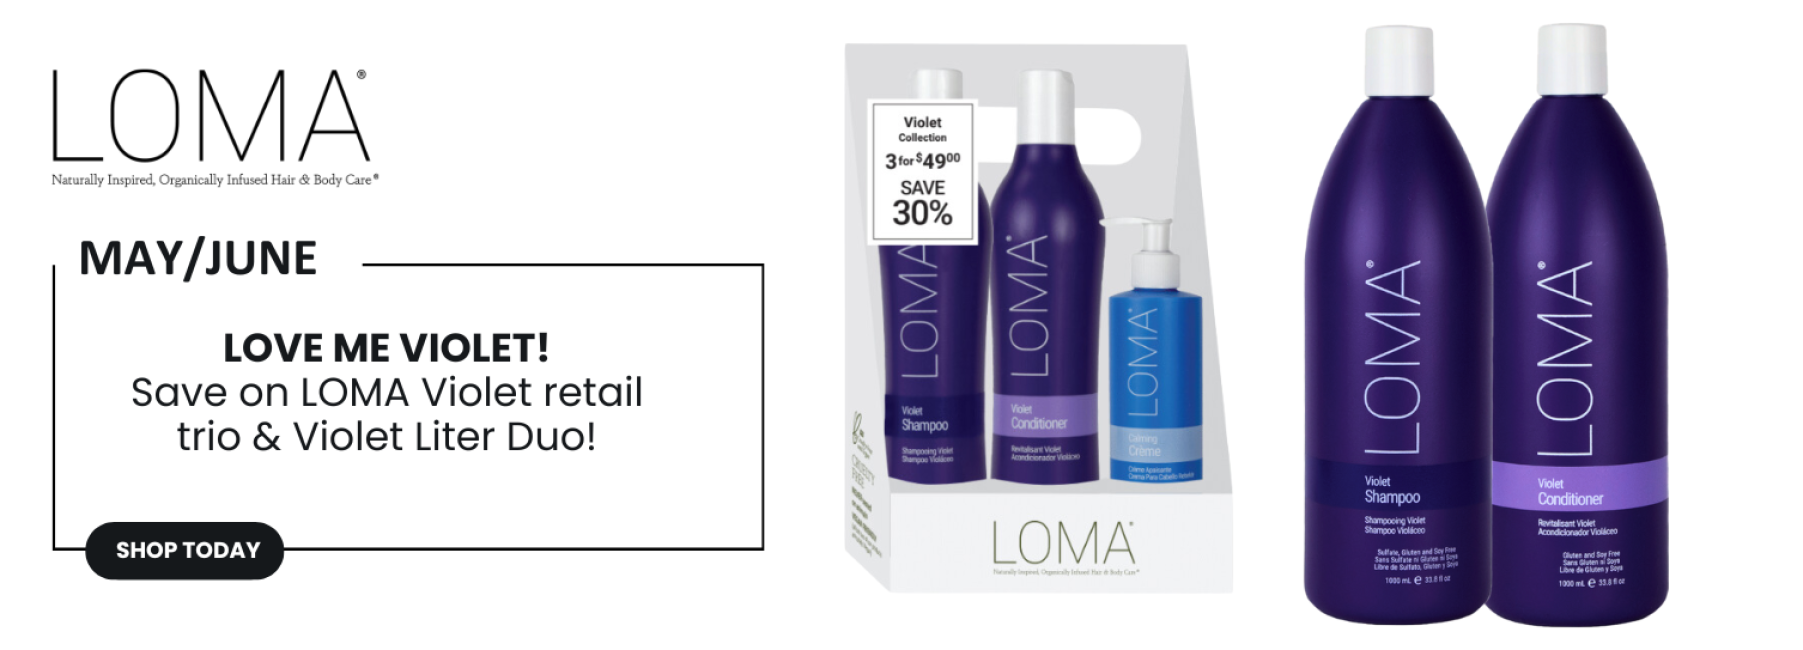 LOMA VIOLET OFFERS MAY_JUNE